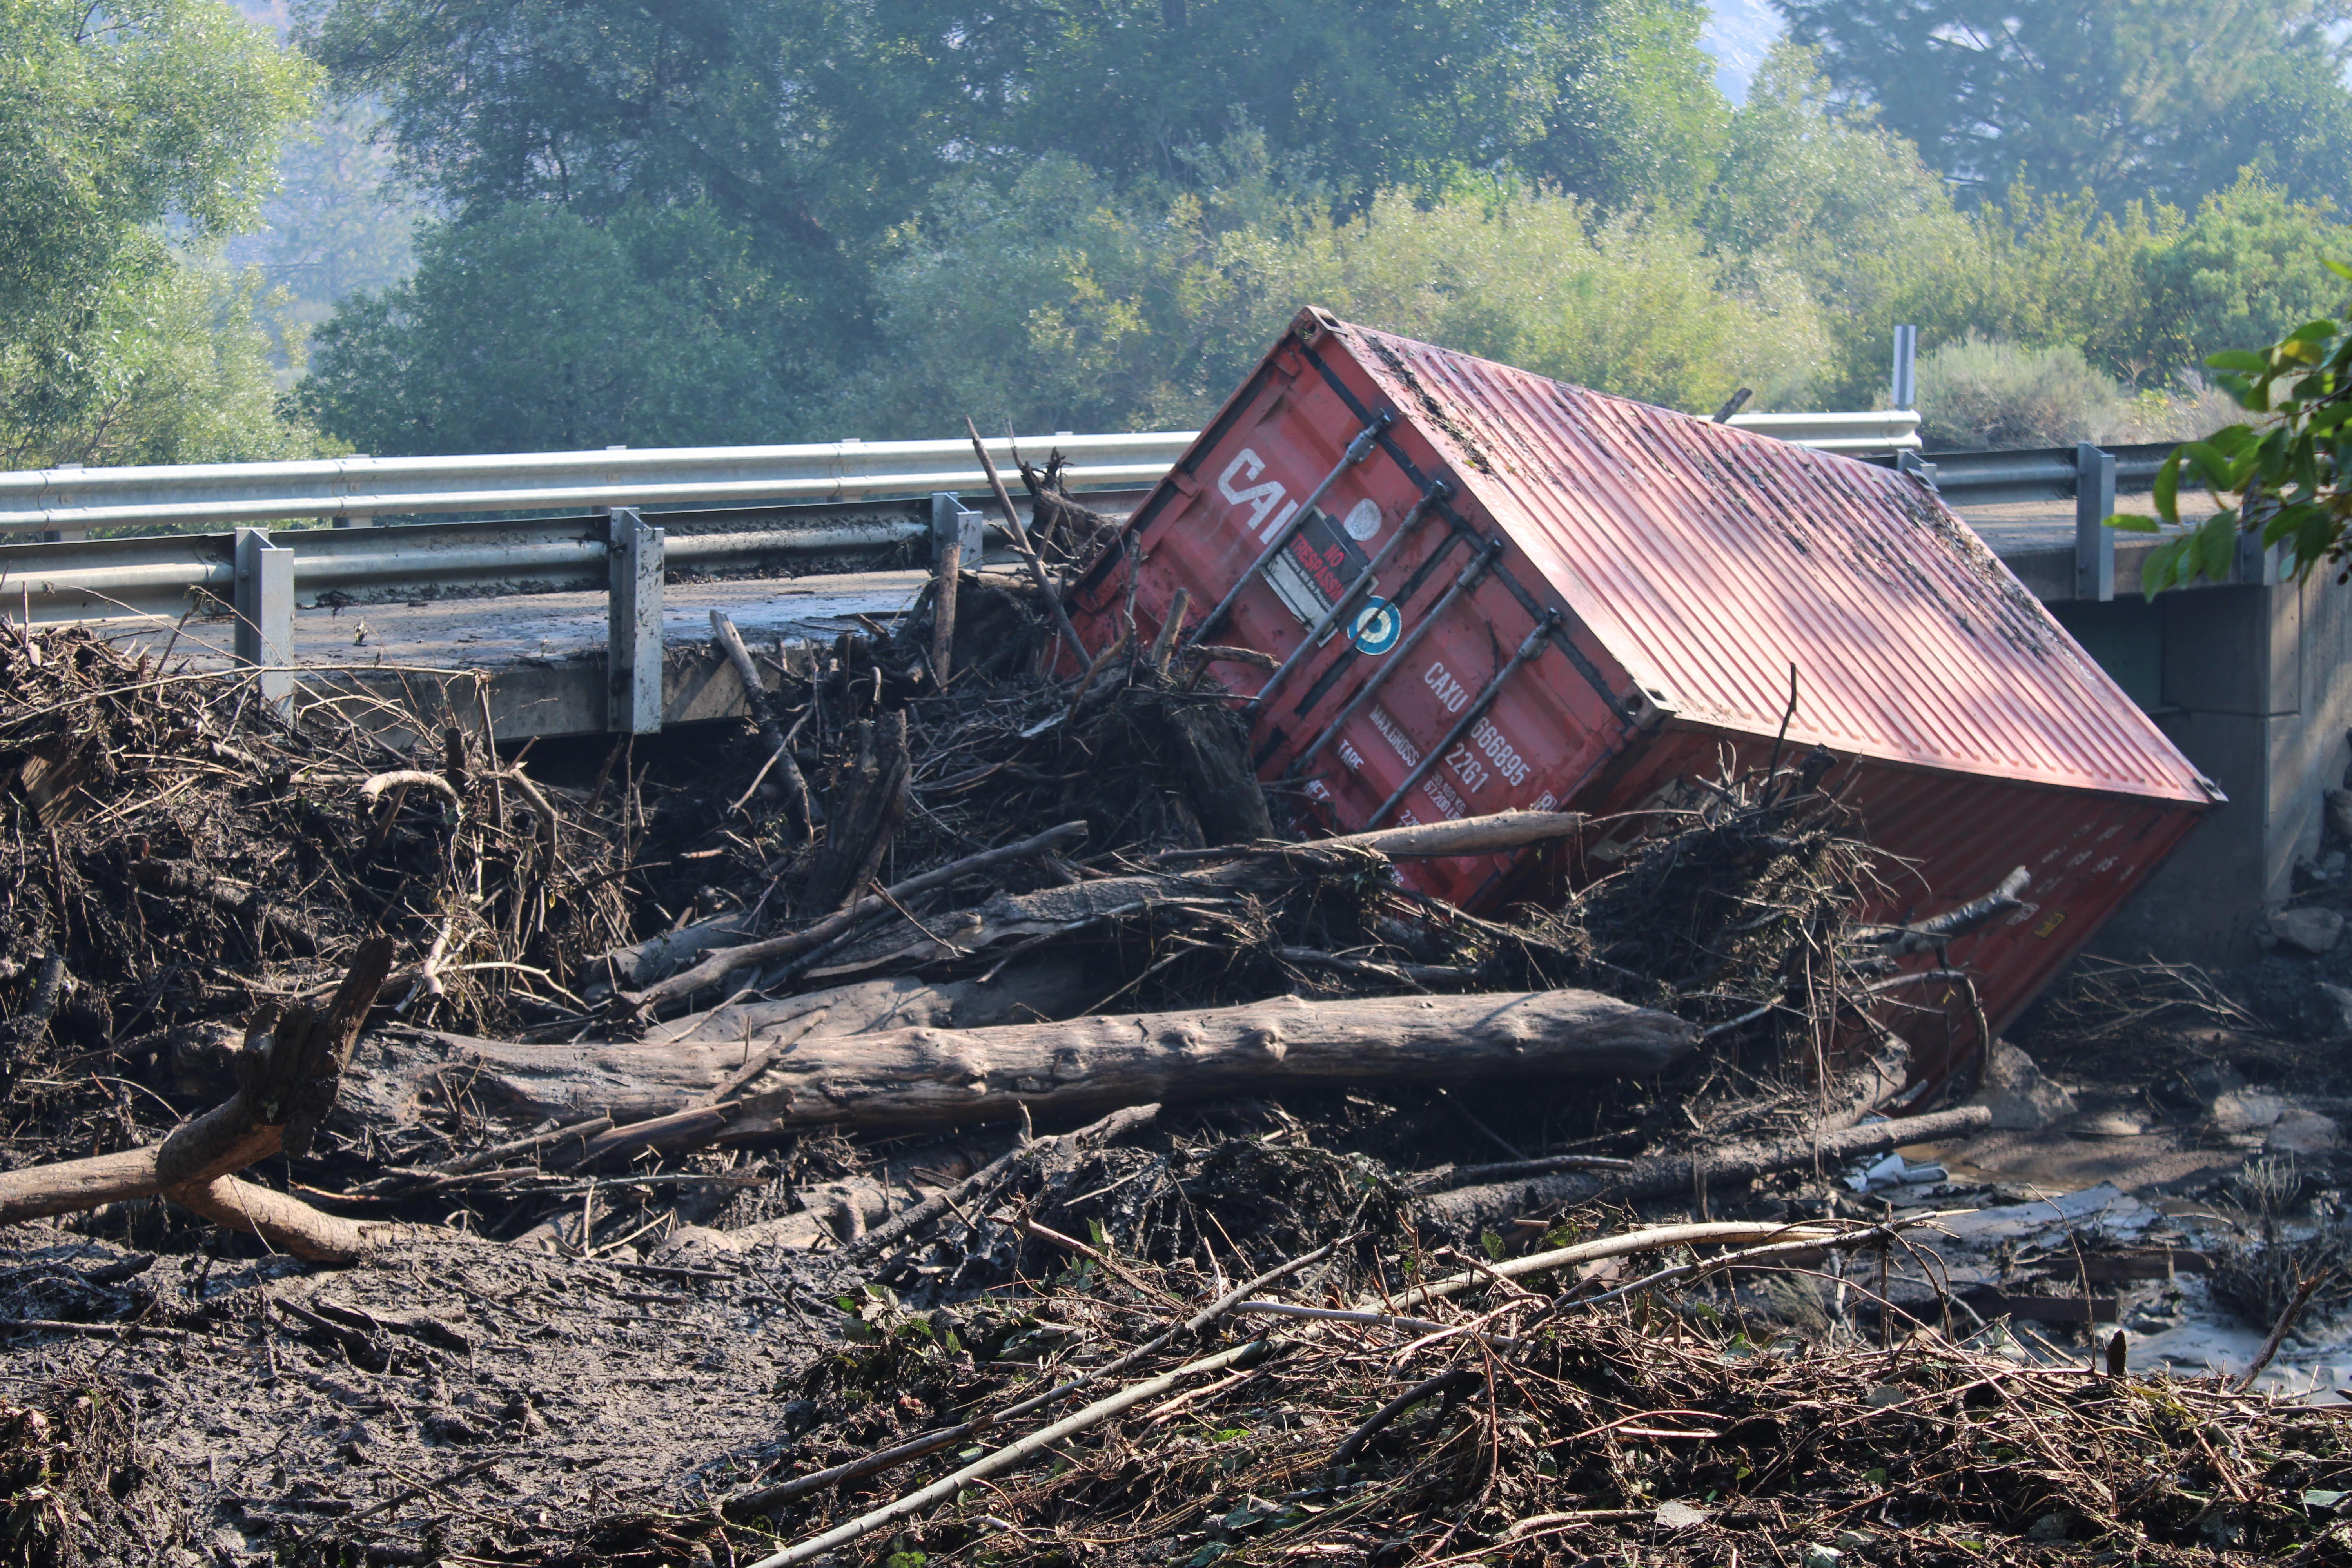 A conex box rests next to a bridge on Humbug Creek Road after heavy rains on the evening of August 2 caused localized flooding and debris flows